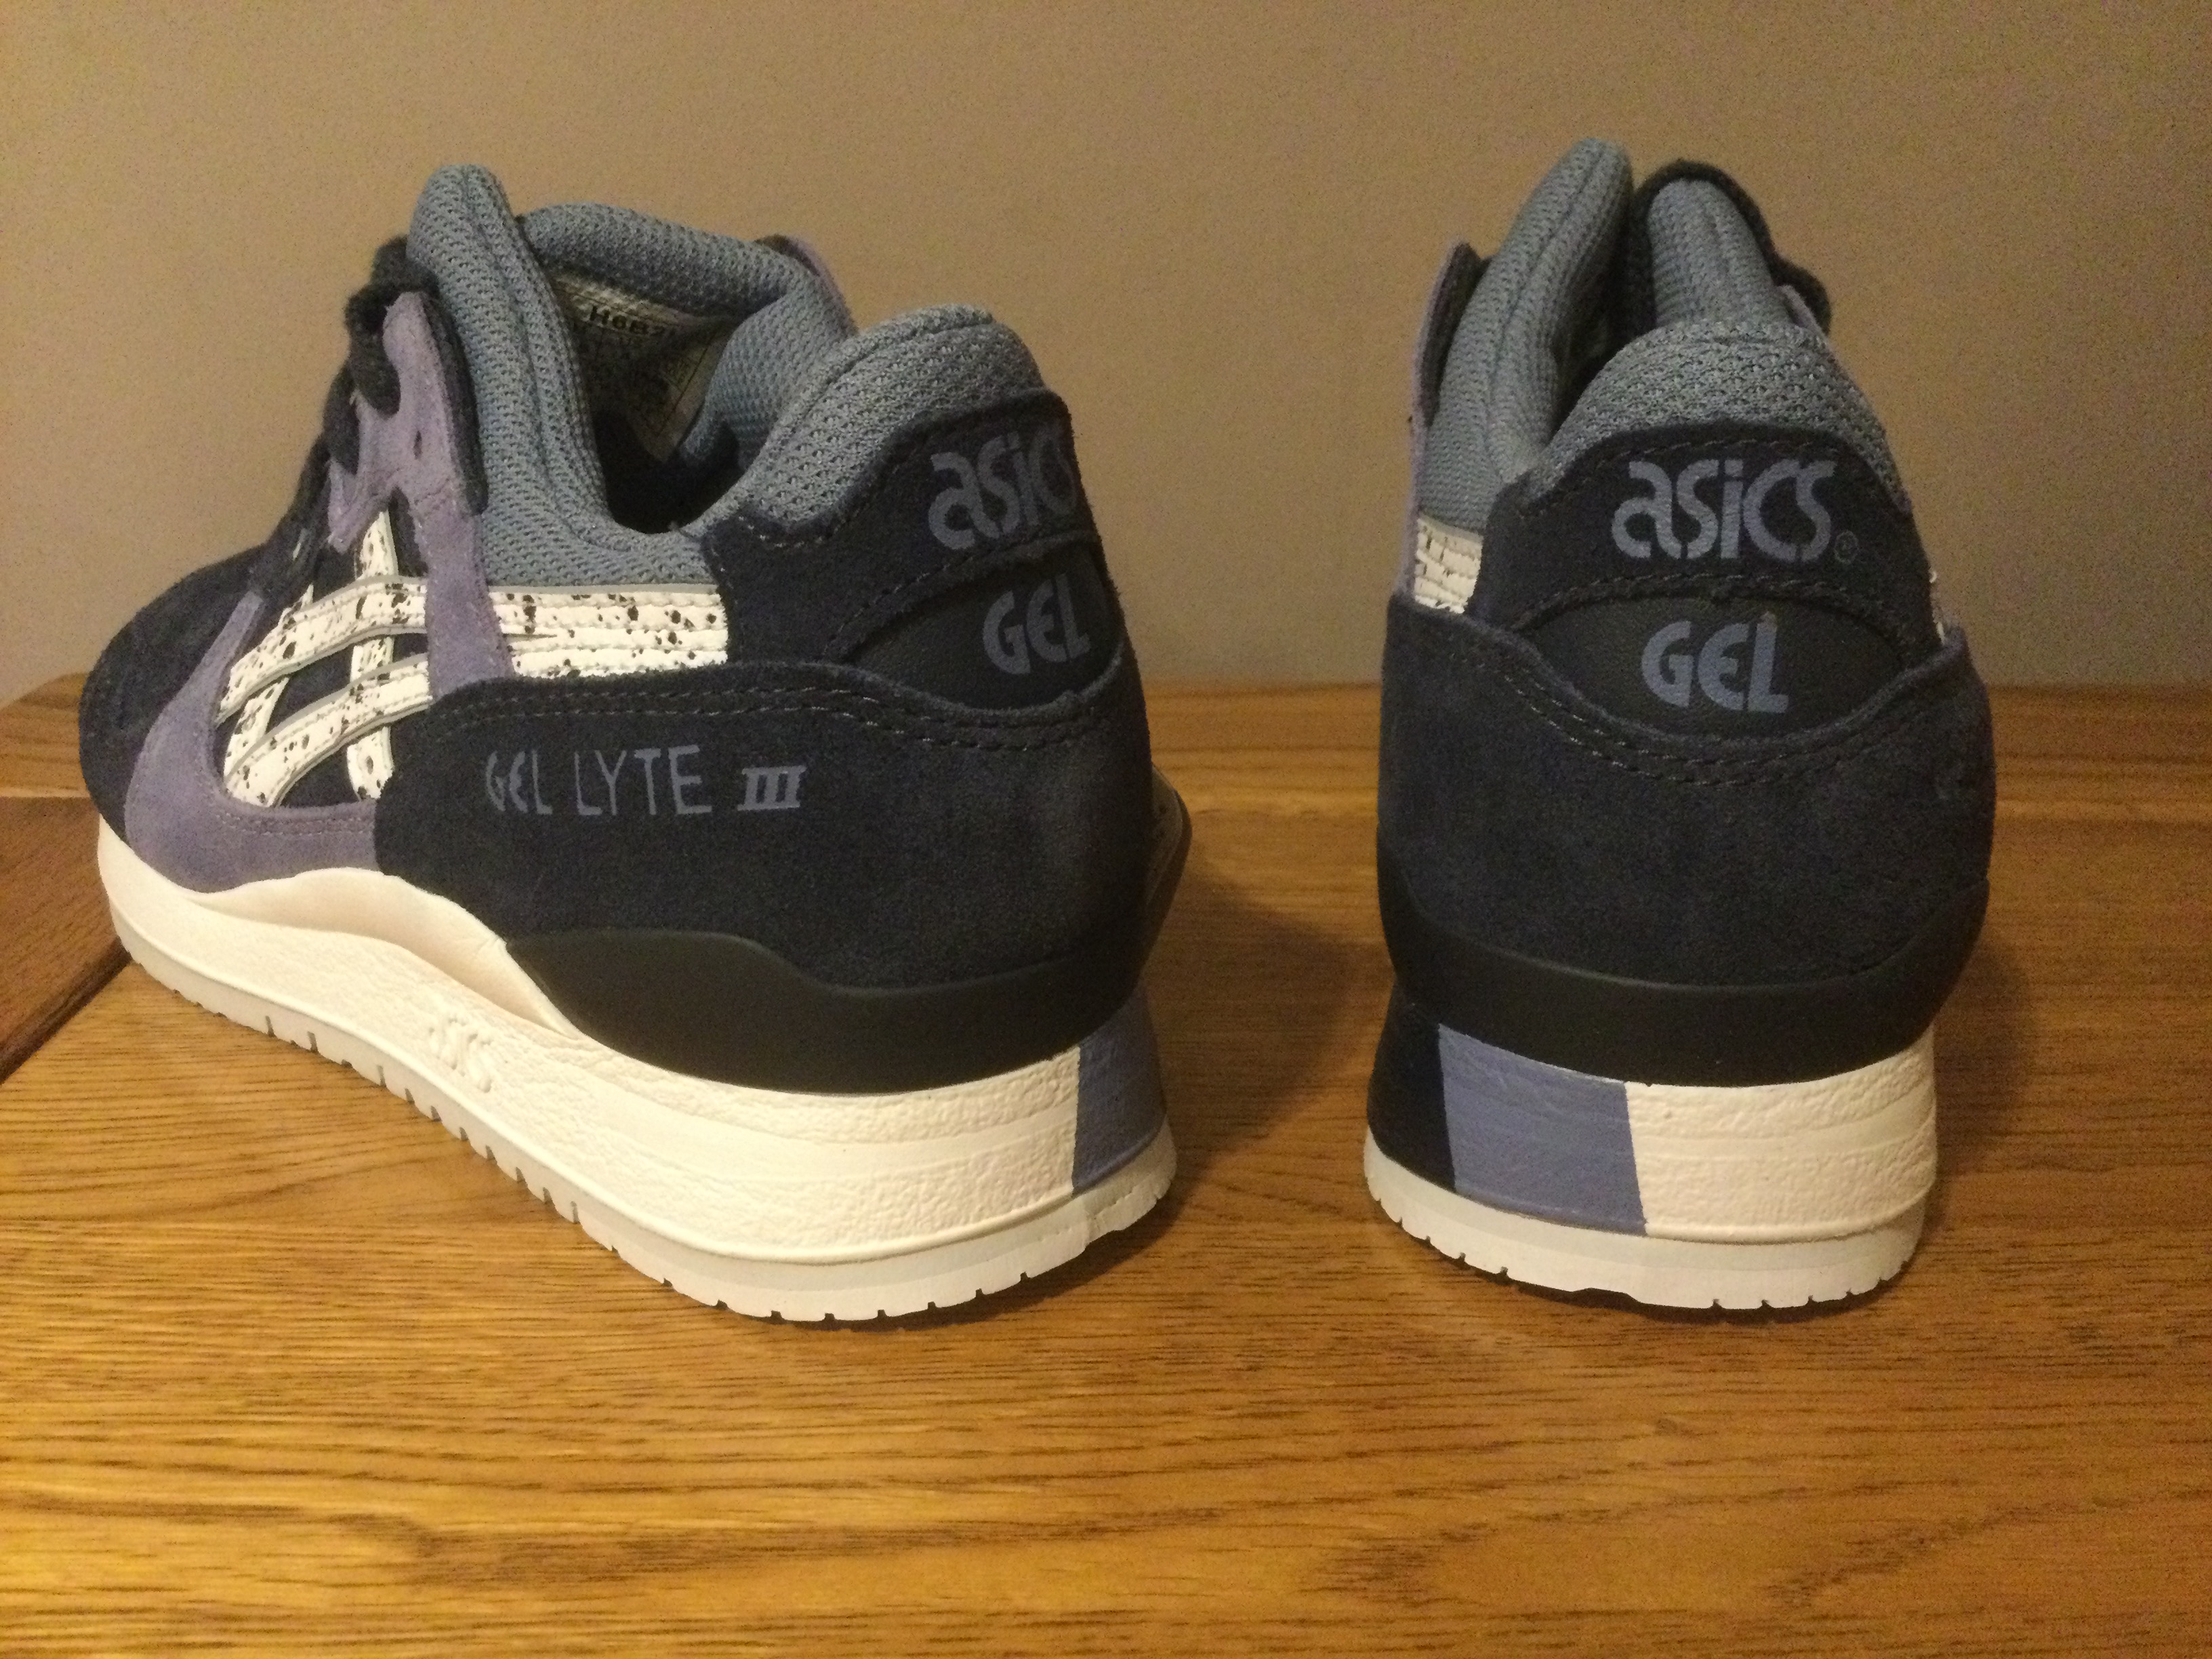 ASICS Gel-Lyte III, Ladies Trainers, Indian Ink, Size 3 - New RRP £95.00 - Image 6 of 7